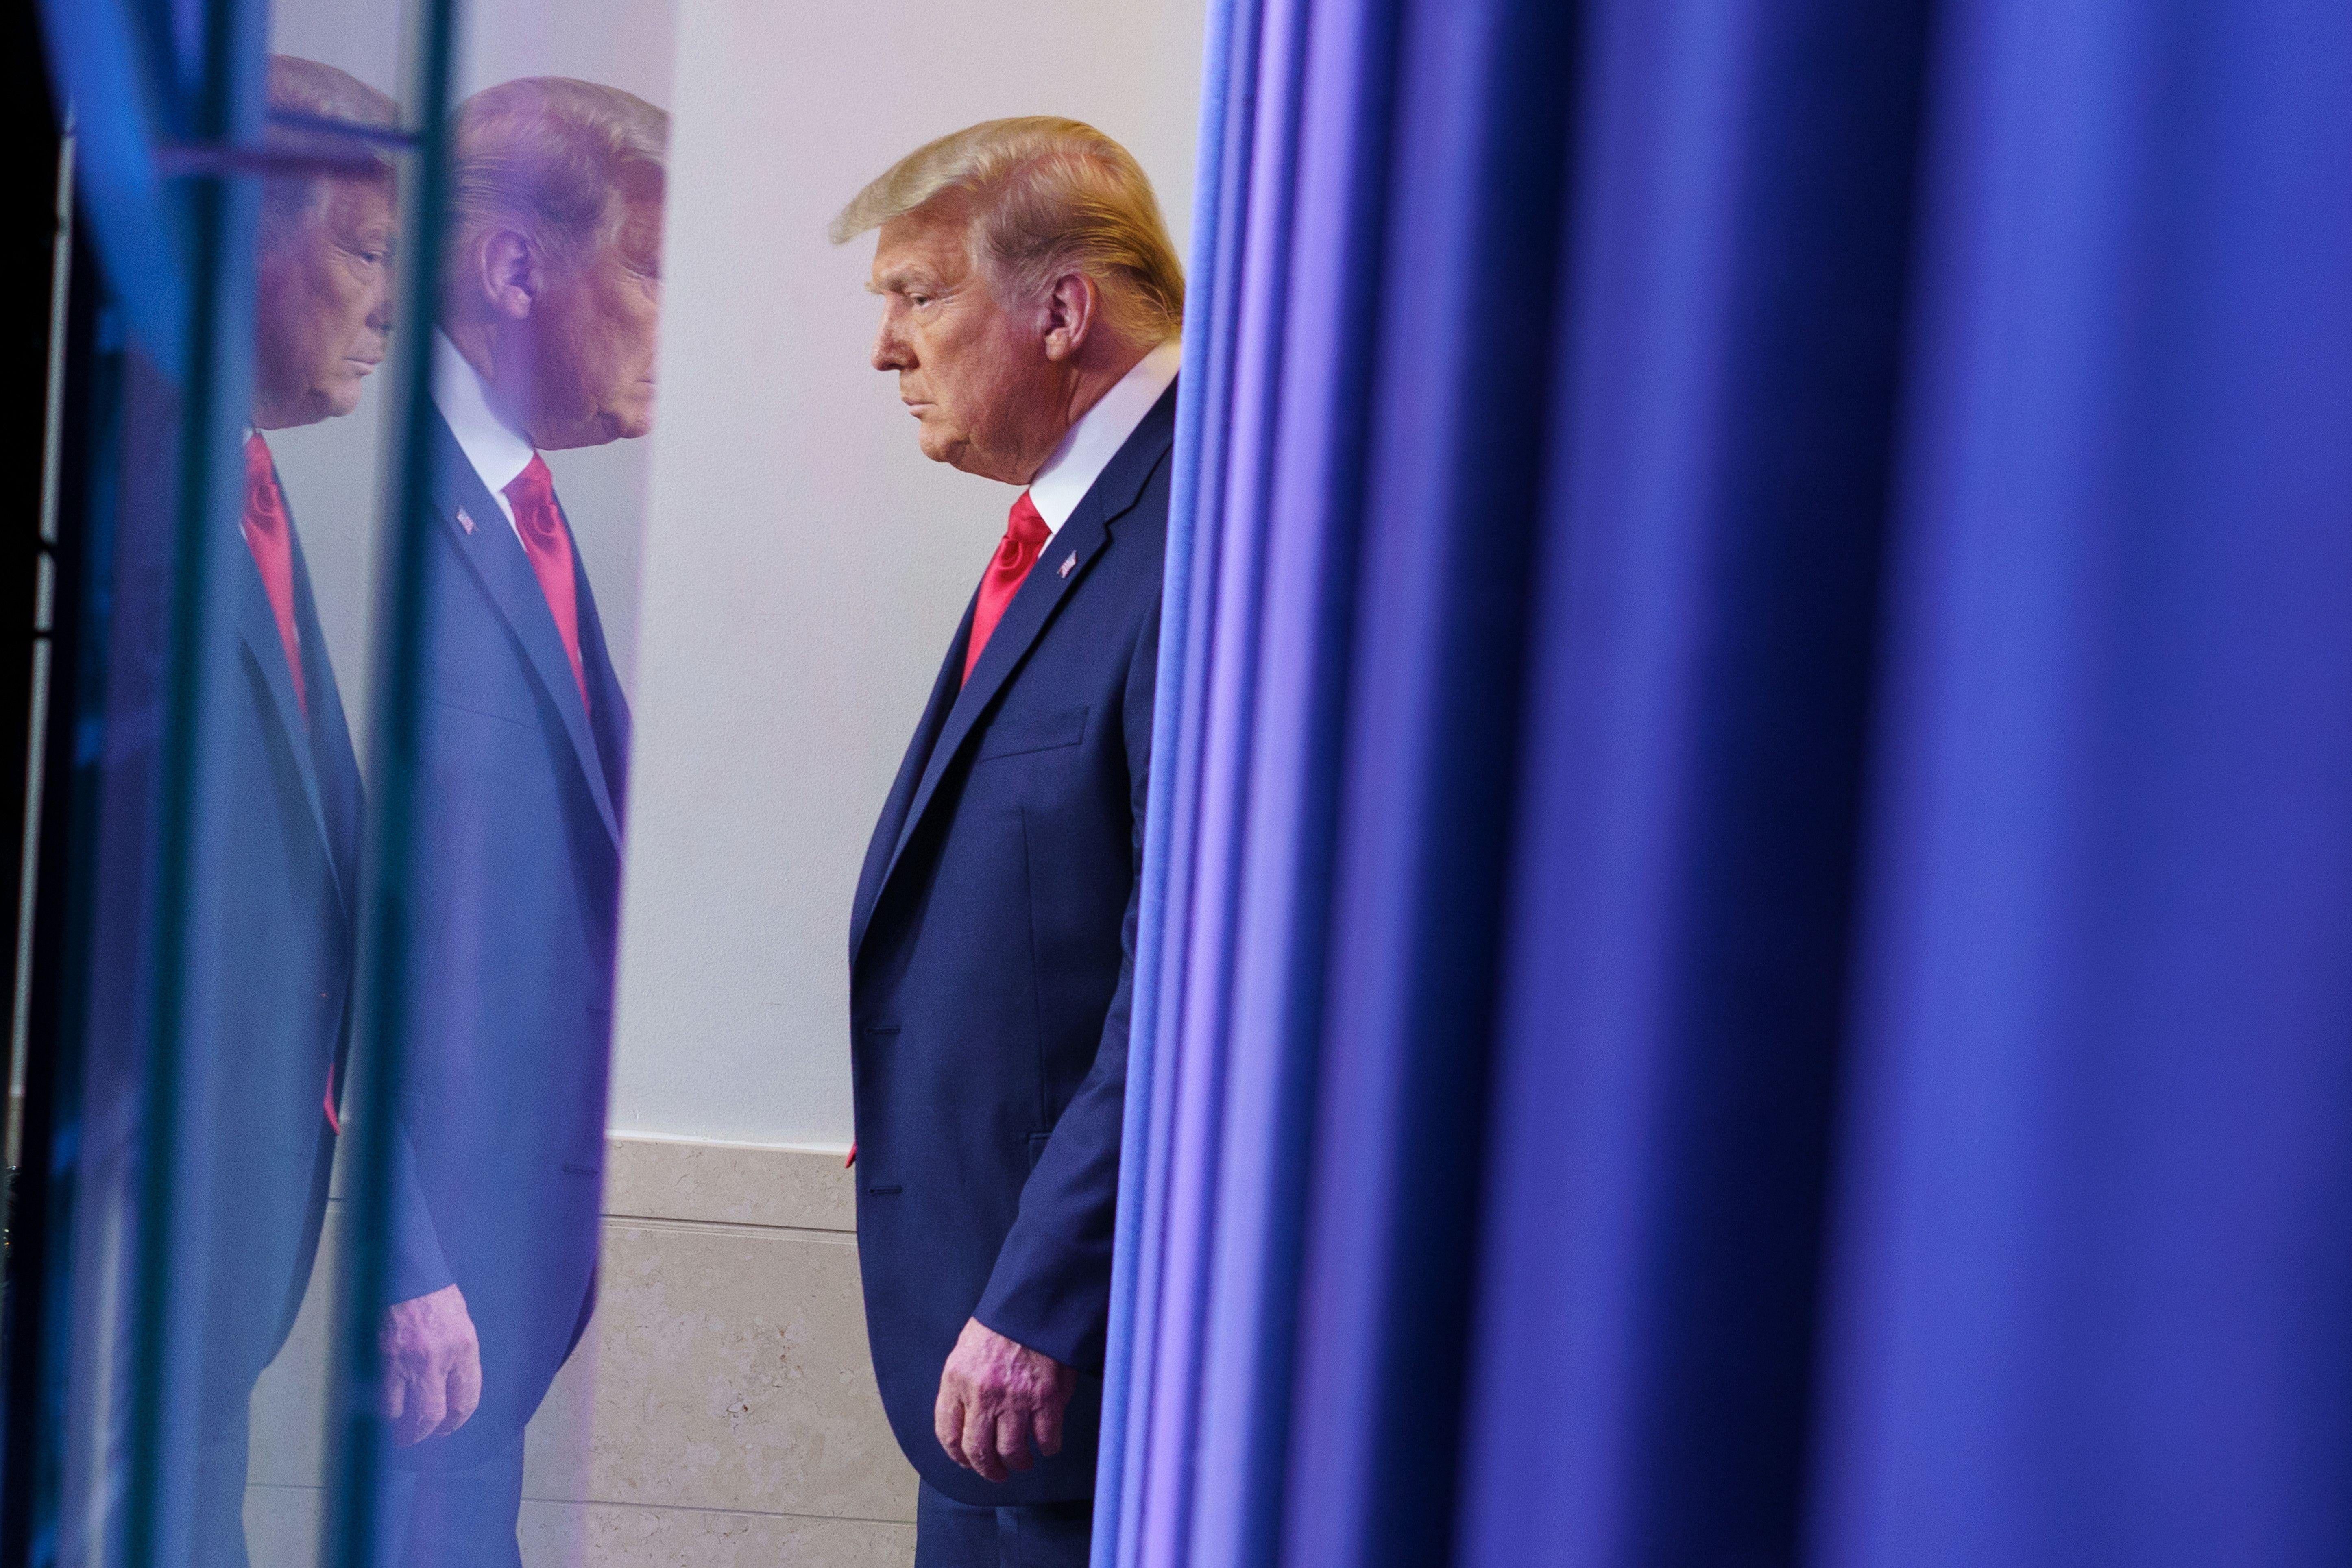 Trump appears depressed behind a curtain, his reflection showing.